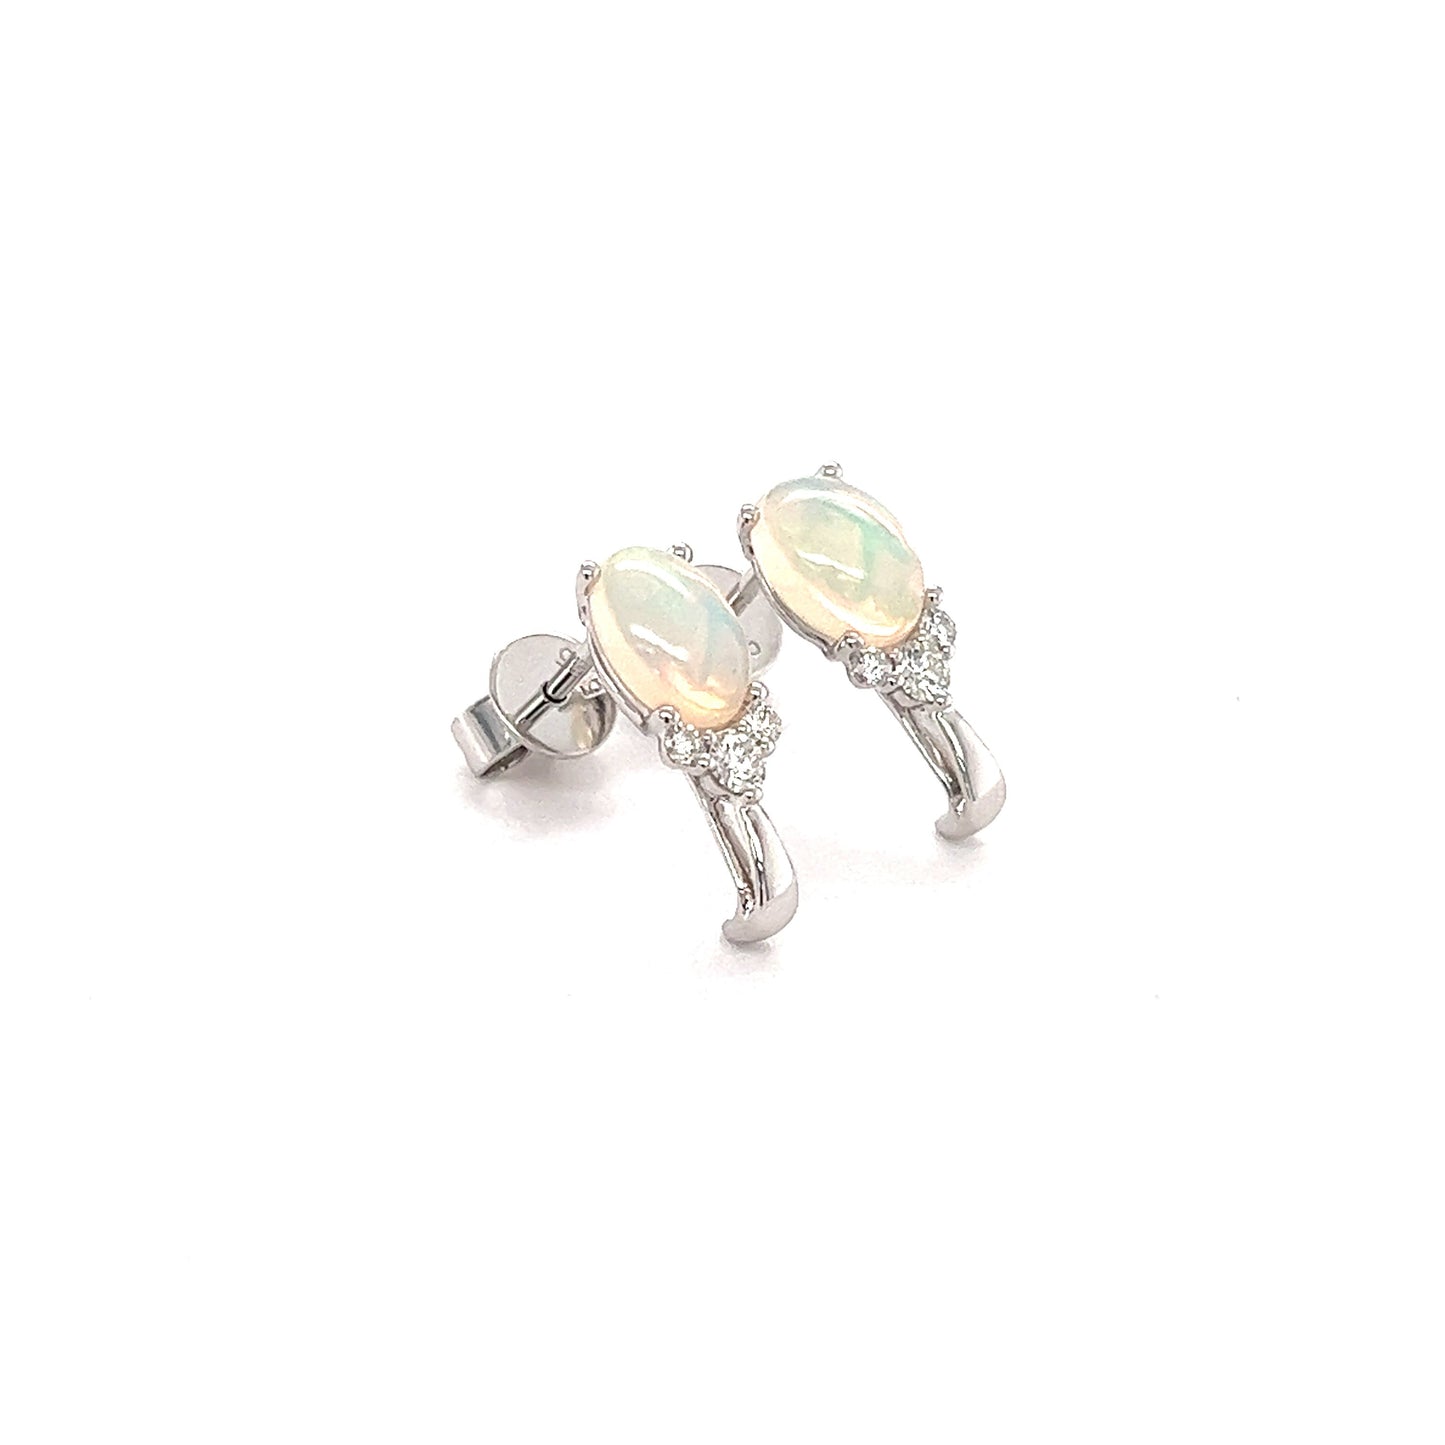 White Ethiopian Opal Stud Earrings with Accent Diamonds in 14K White Gold Left Side View